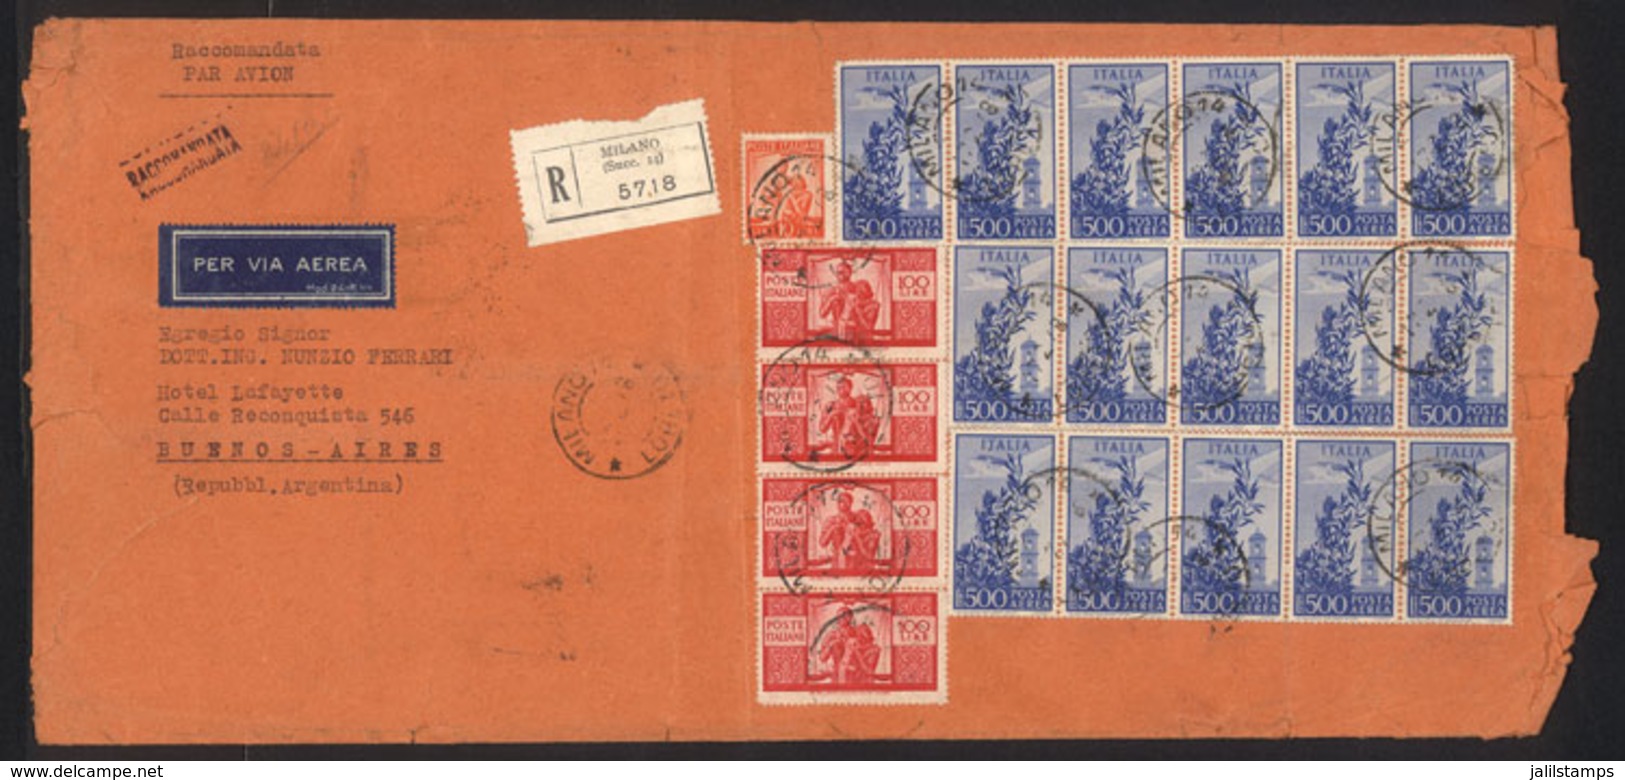 ITALY: Large Registered Airmail Cover Sent From Milano To Argentina On 17/FE/1948 With Spectacular Postage Of 8,410 Lire - Unclassified